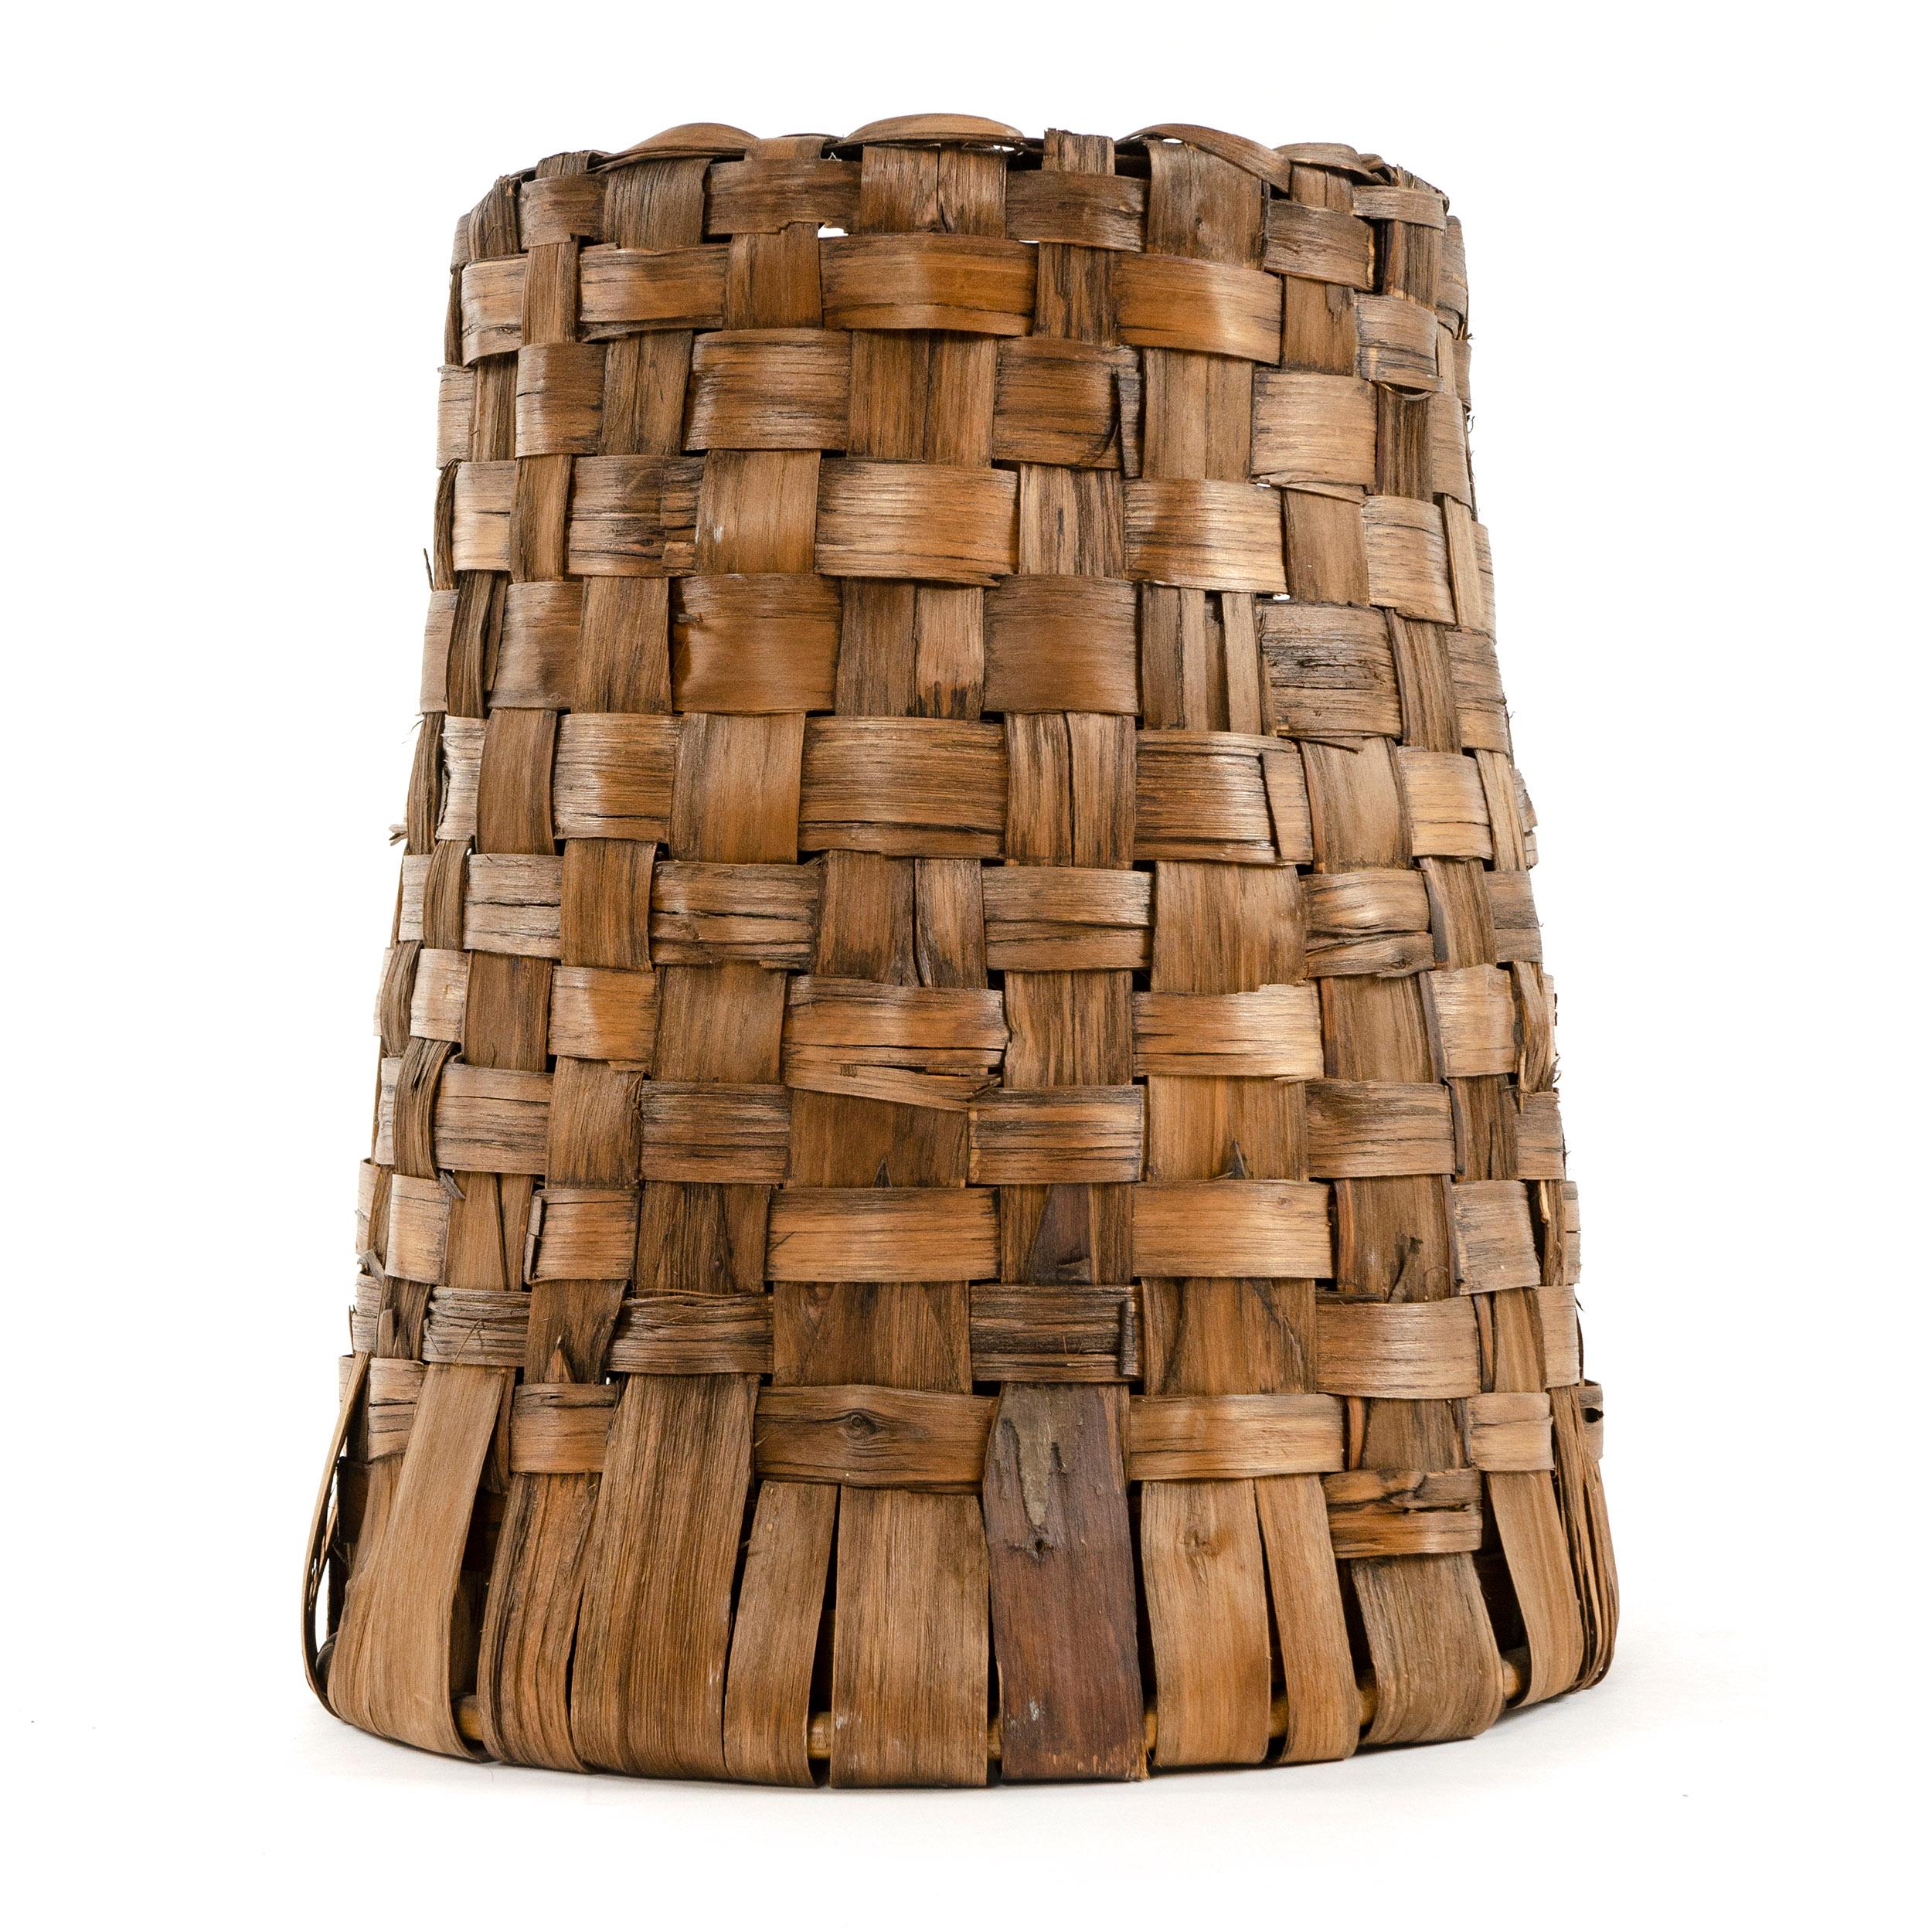 A steel frame lamp shade with woven bark covering.